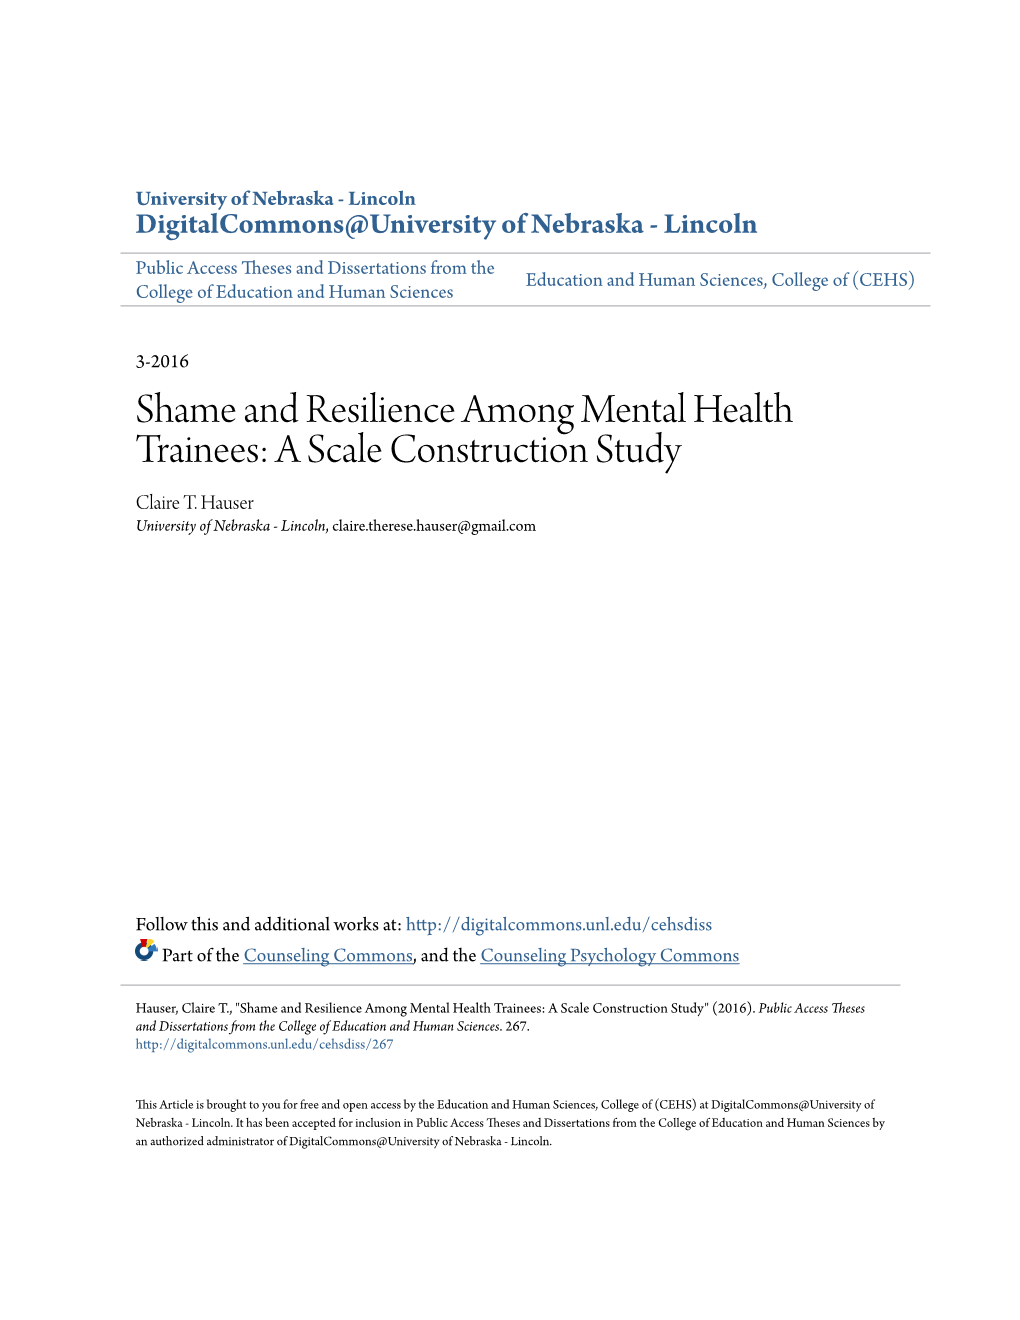 Shame and Resilience Among Mental Health Trainees: a Scale Construction Study Claire T